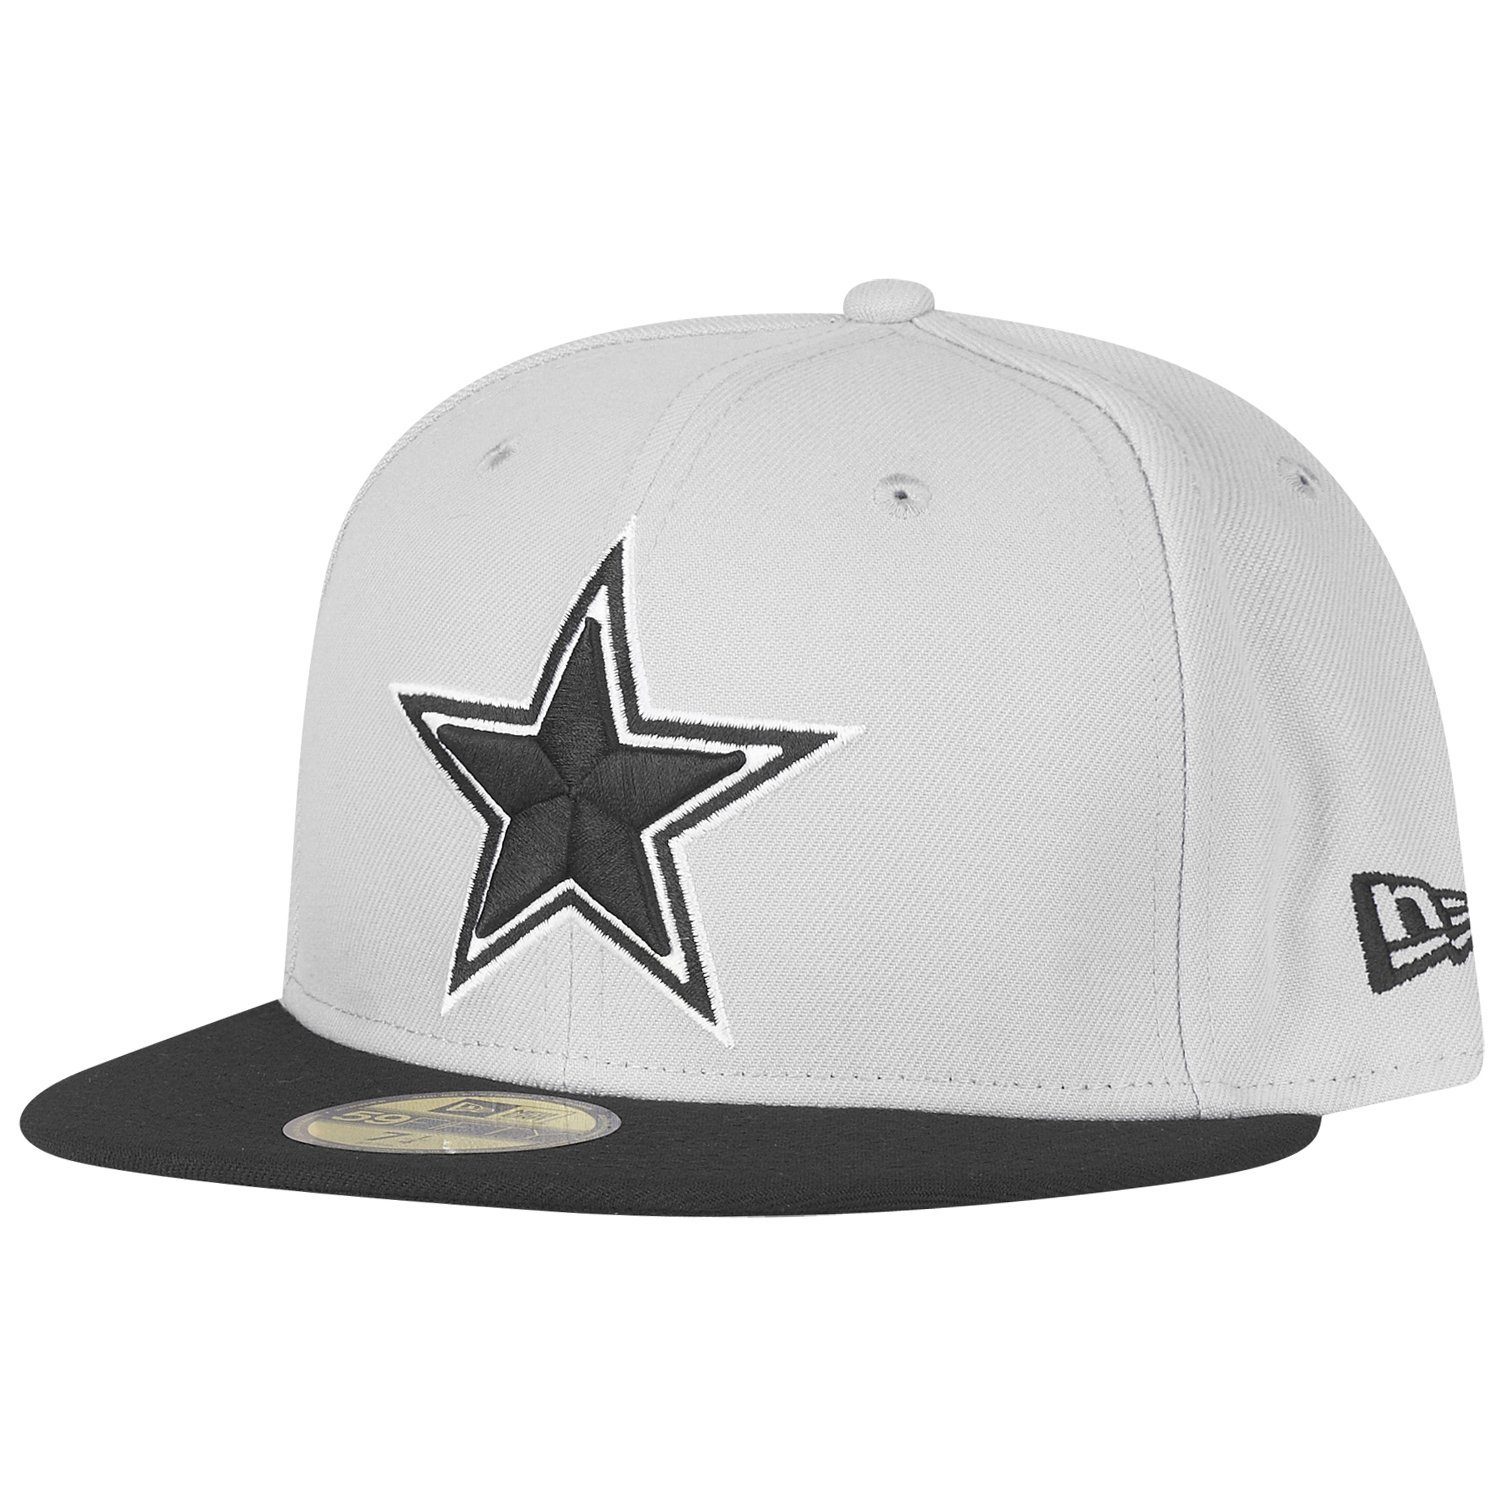 New Cap Era Dallas 59Fifty Cowboys Fitted